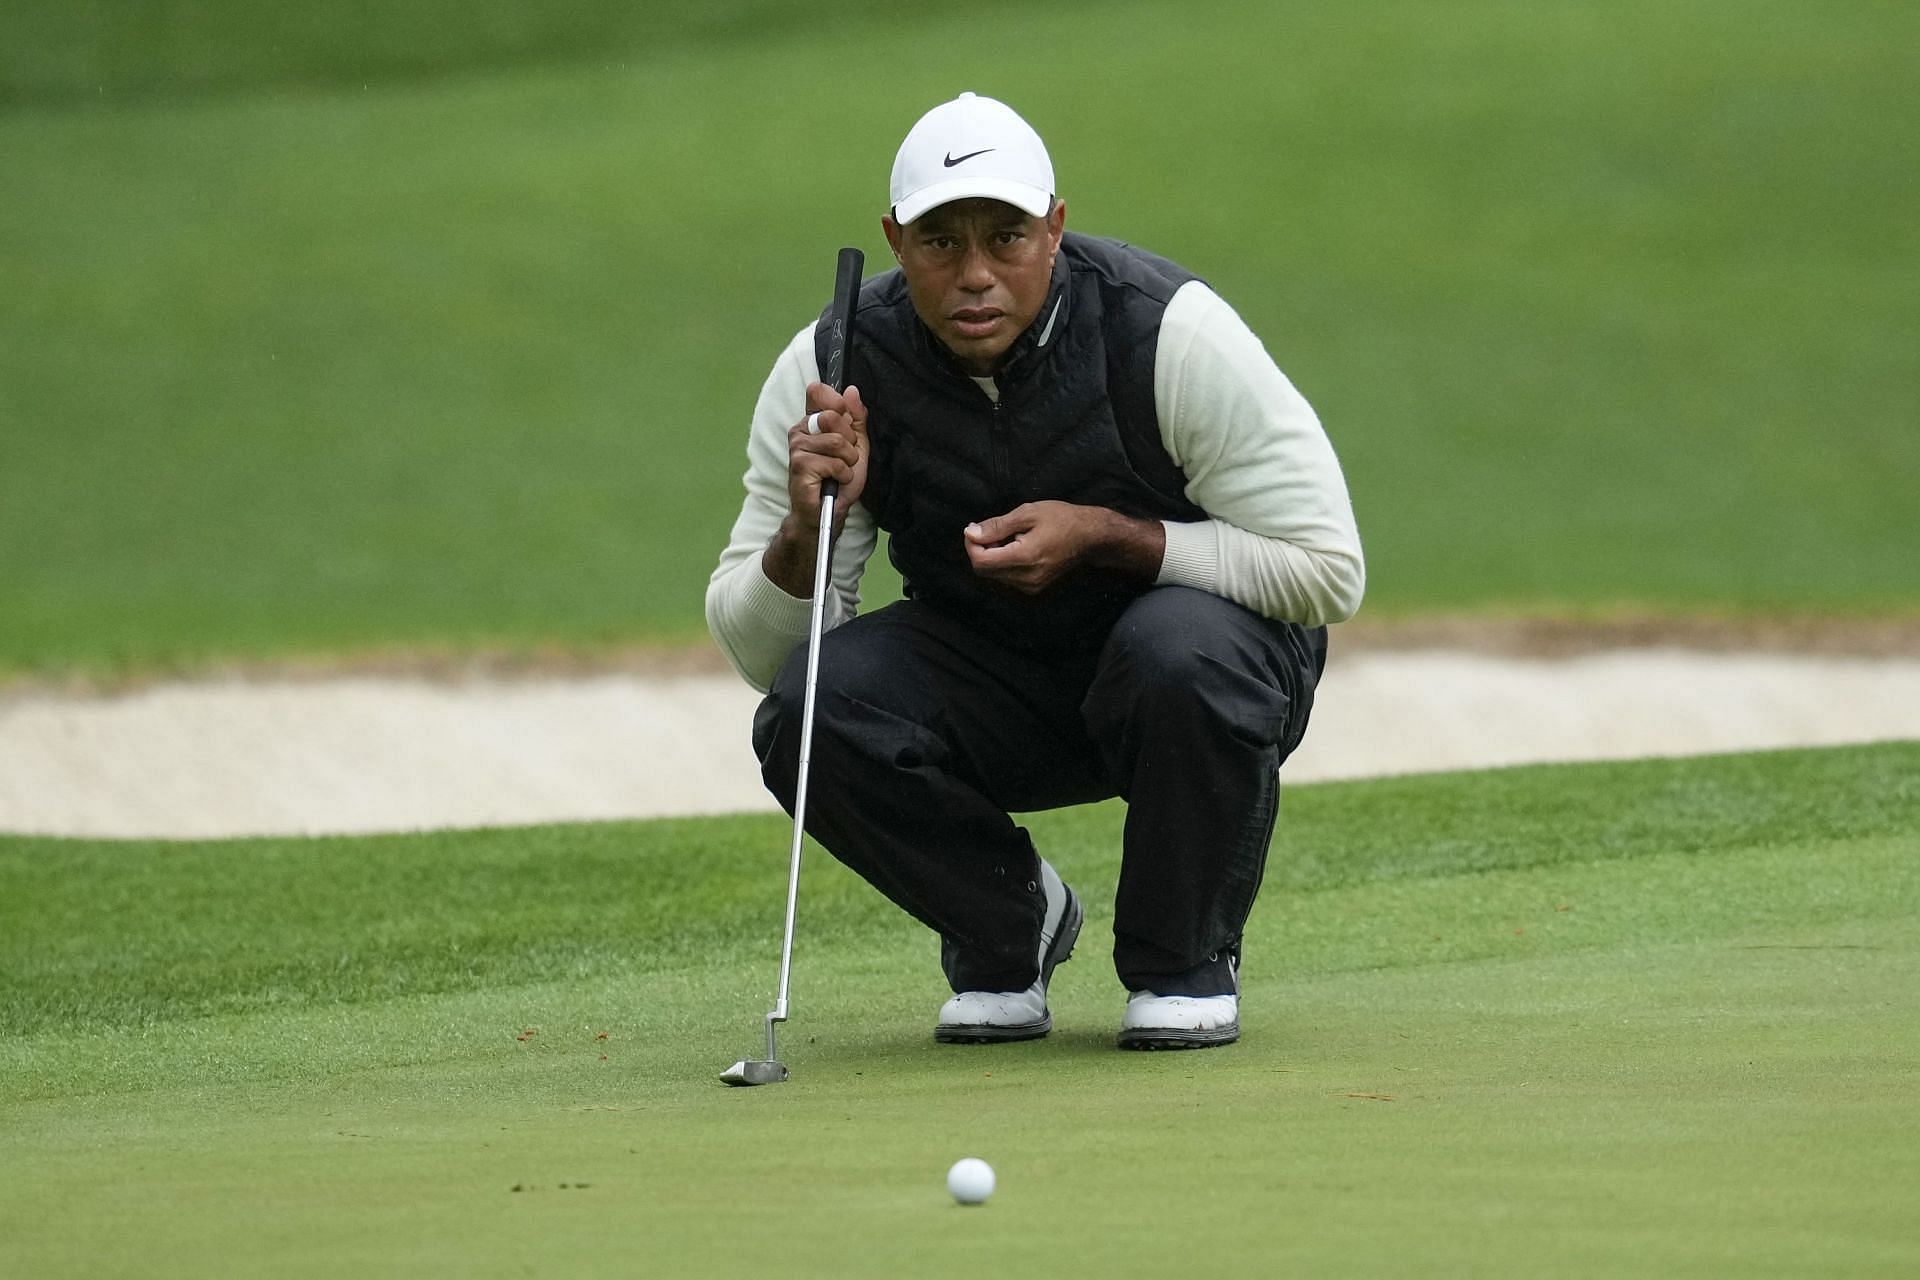 Tiger Woods lines up a putt on the 16th hole during the weather delayed second round of the Masters golf tournament at Augusta National Golf Club on April 8, 2023 (AP Photo/Mark Baker, File)